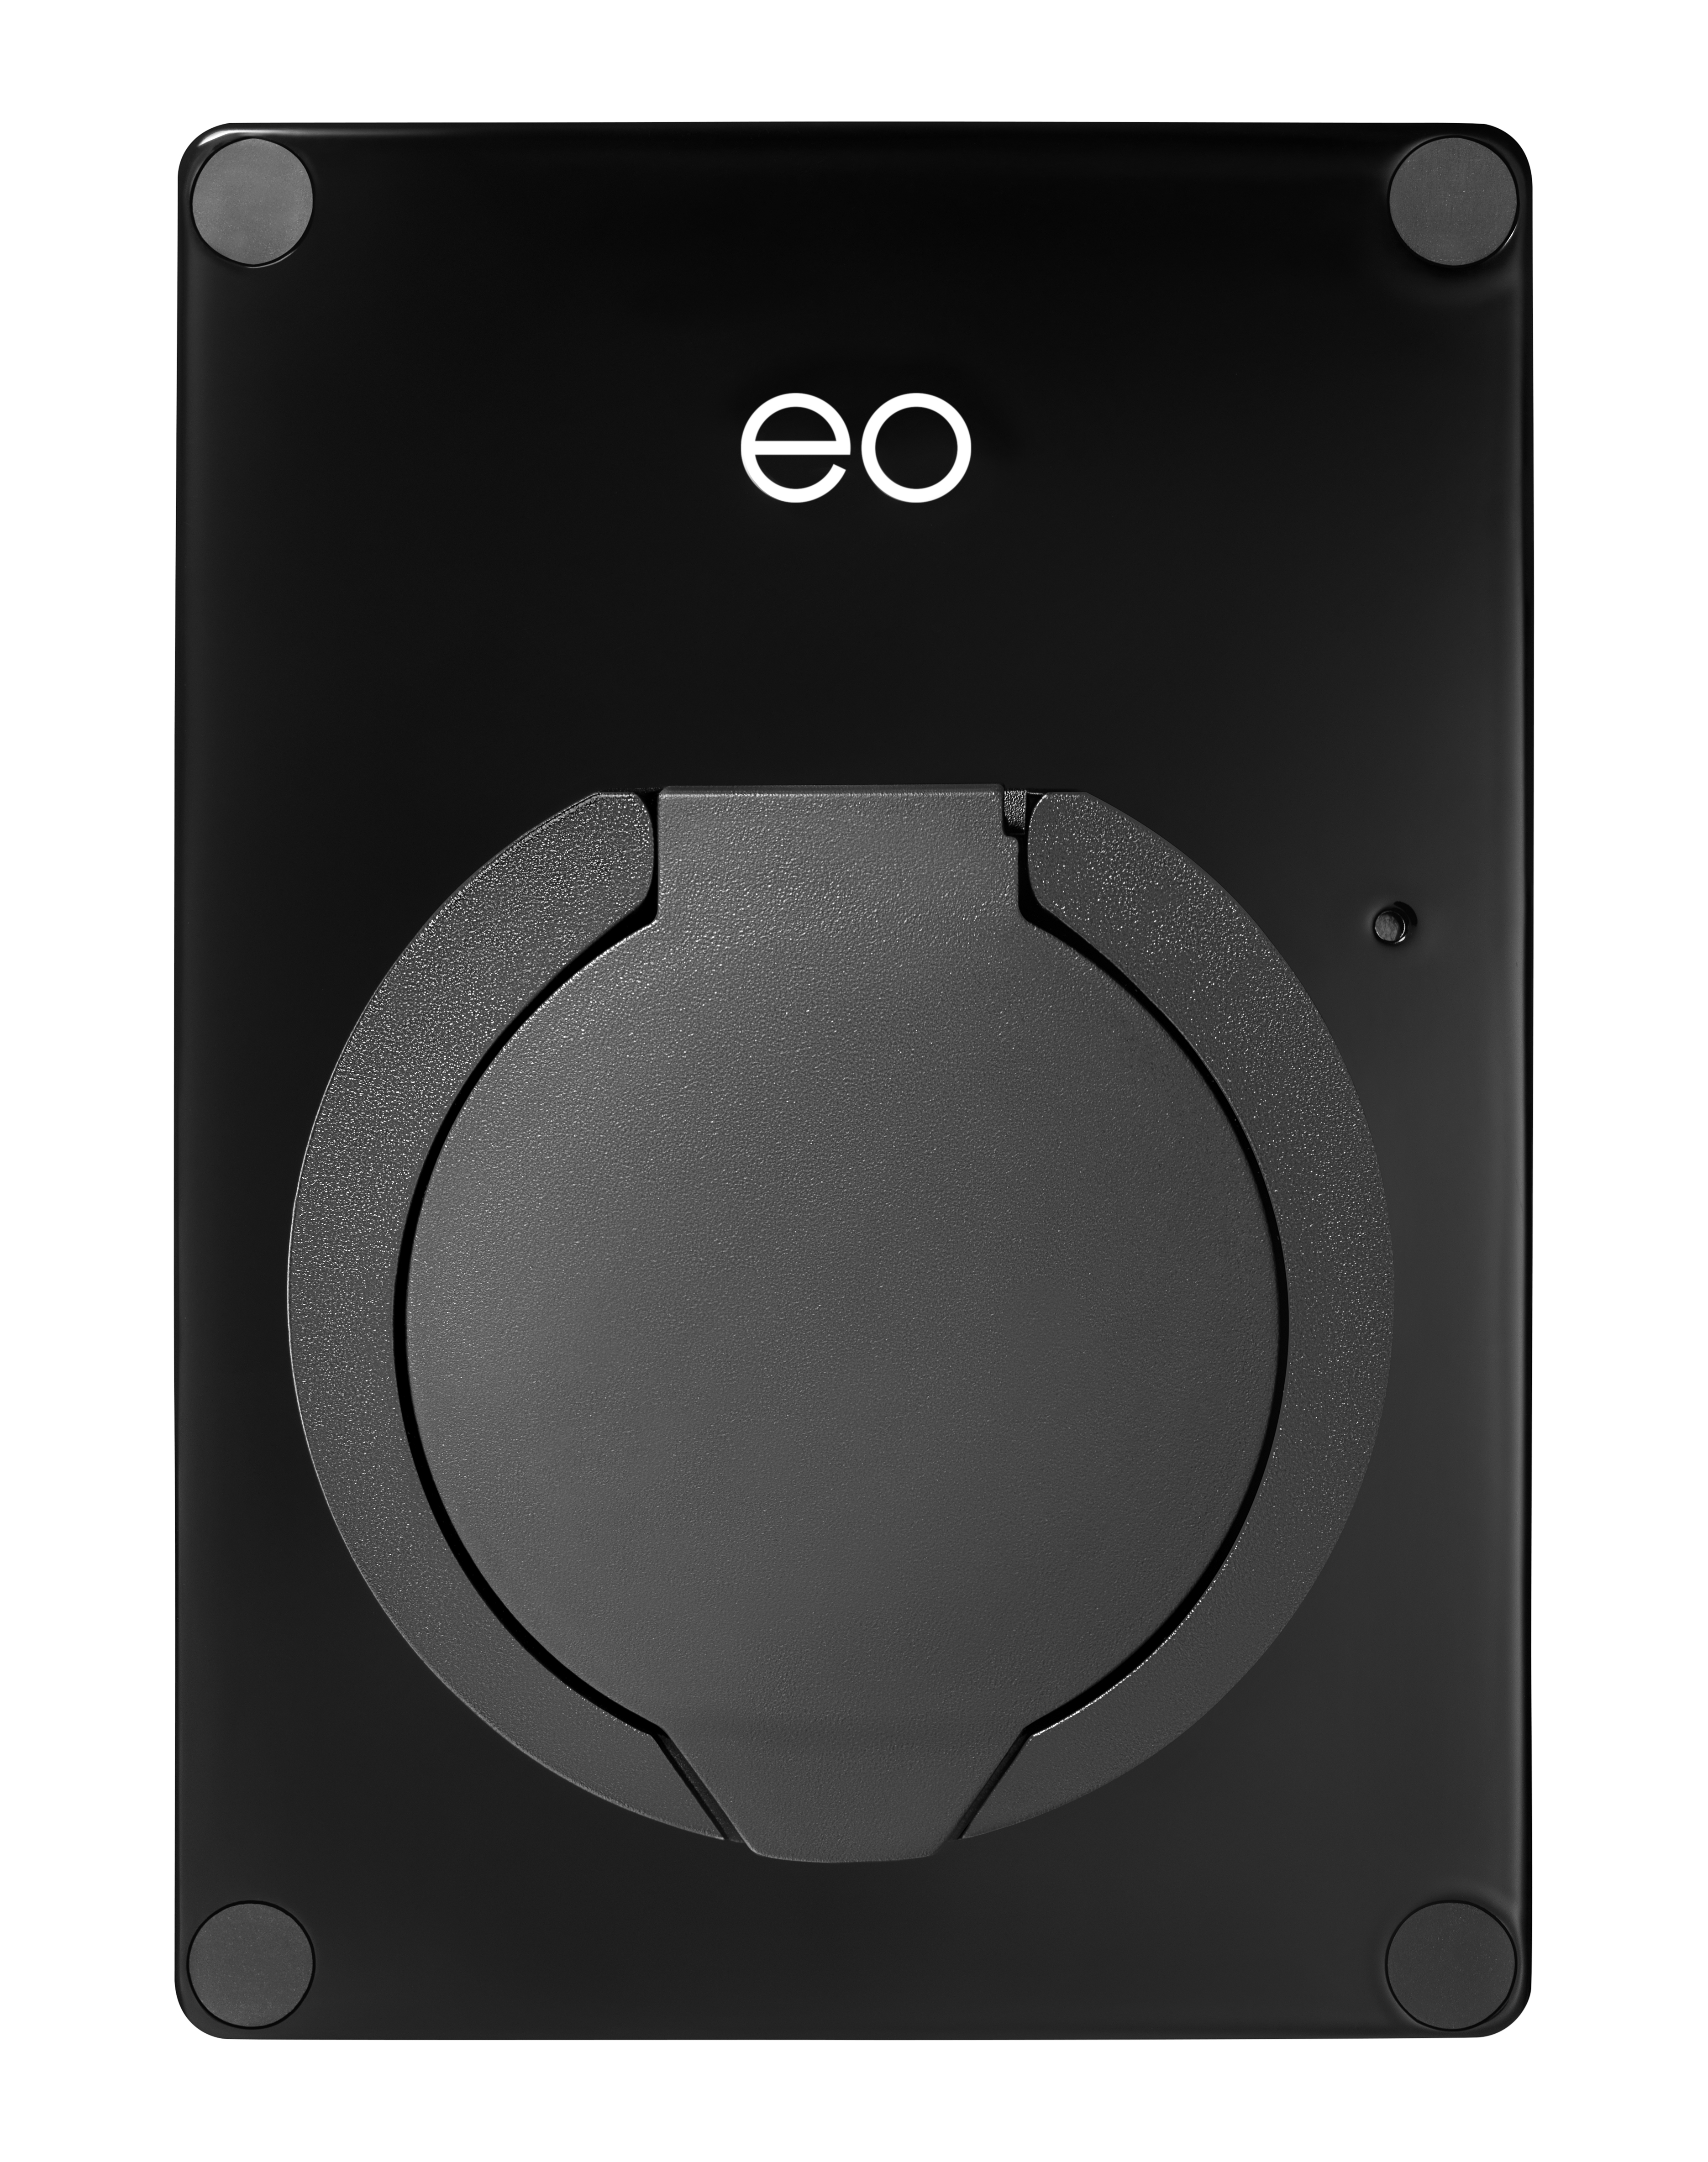 Image showing an EO Mini Pro